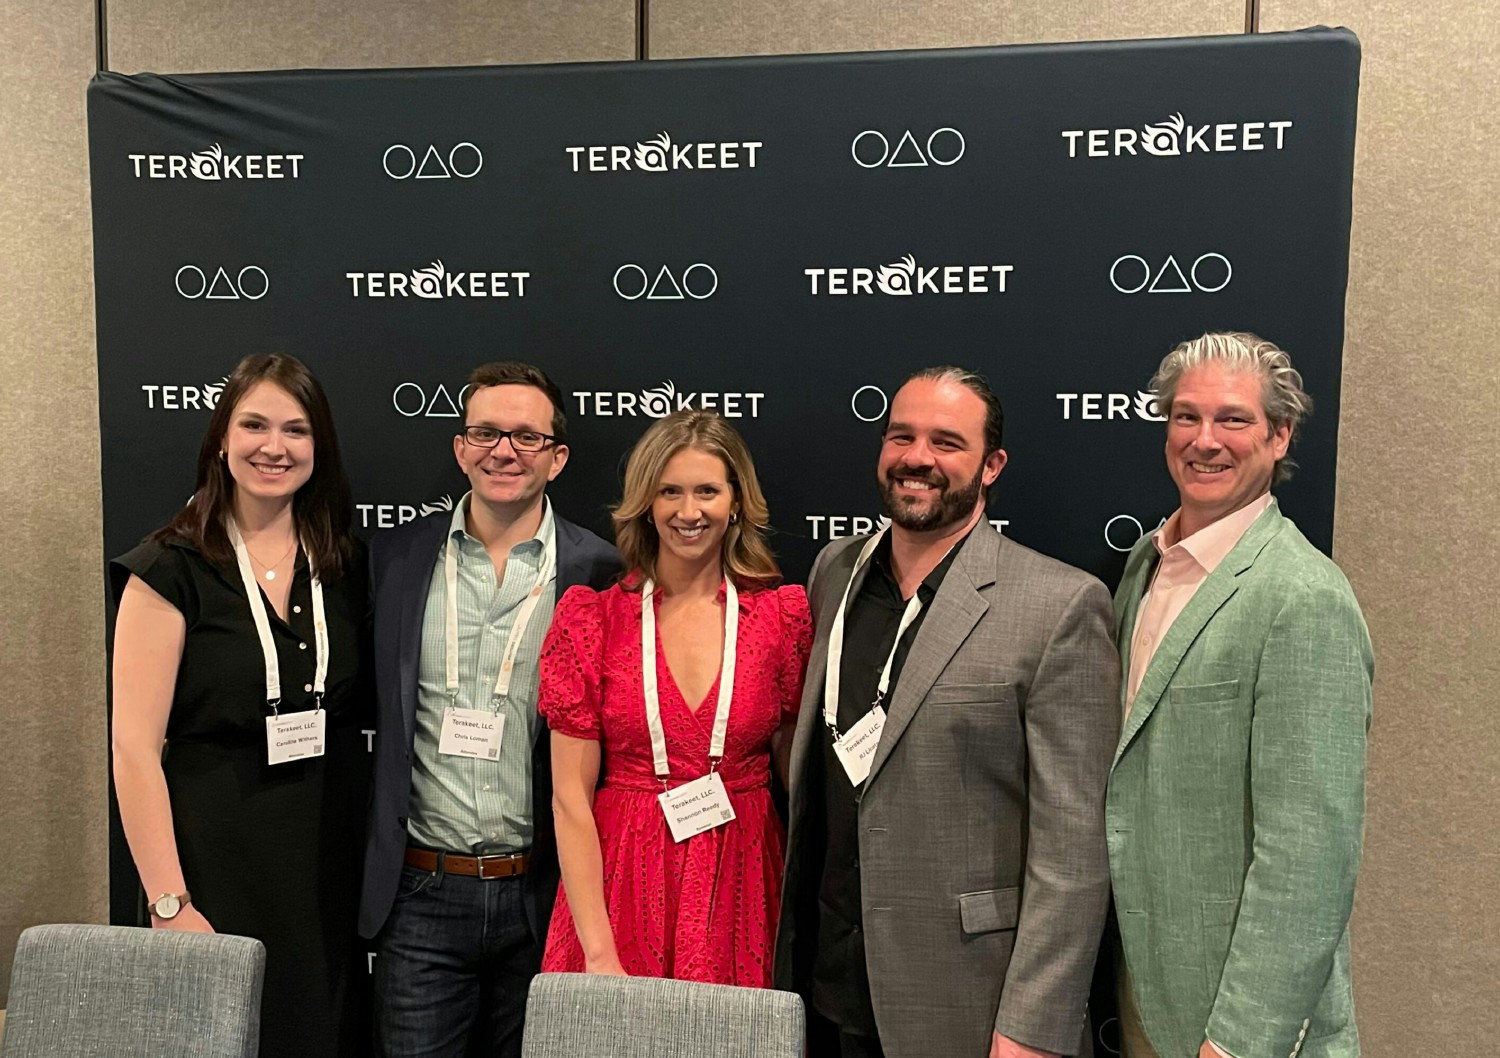 Terakeet employees at a national conference launching a new category of marketing: Owned Asset Optimization (OAO). 
